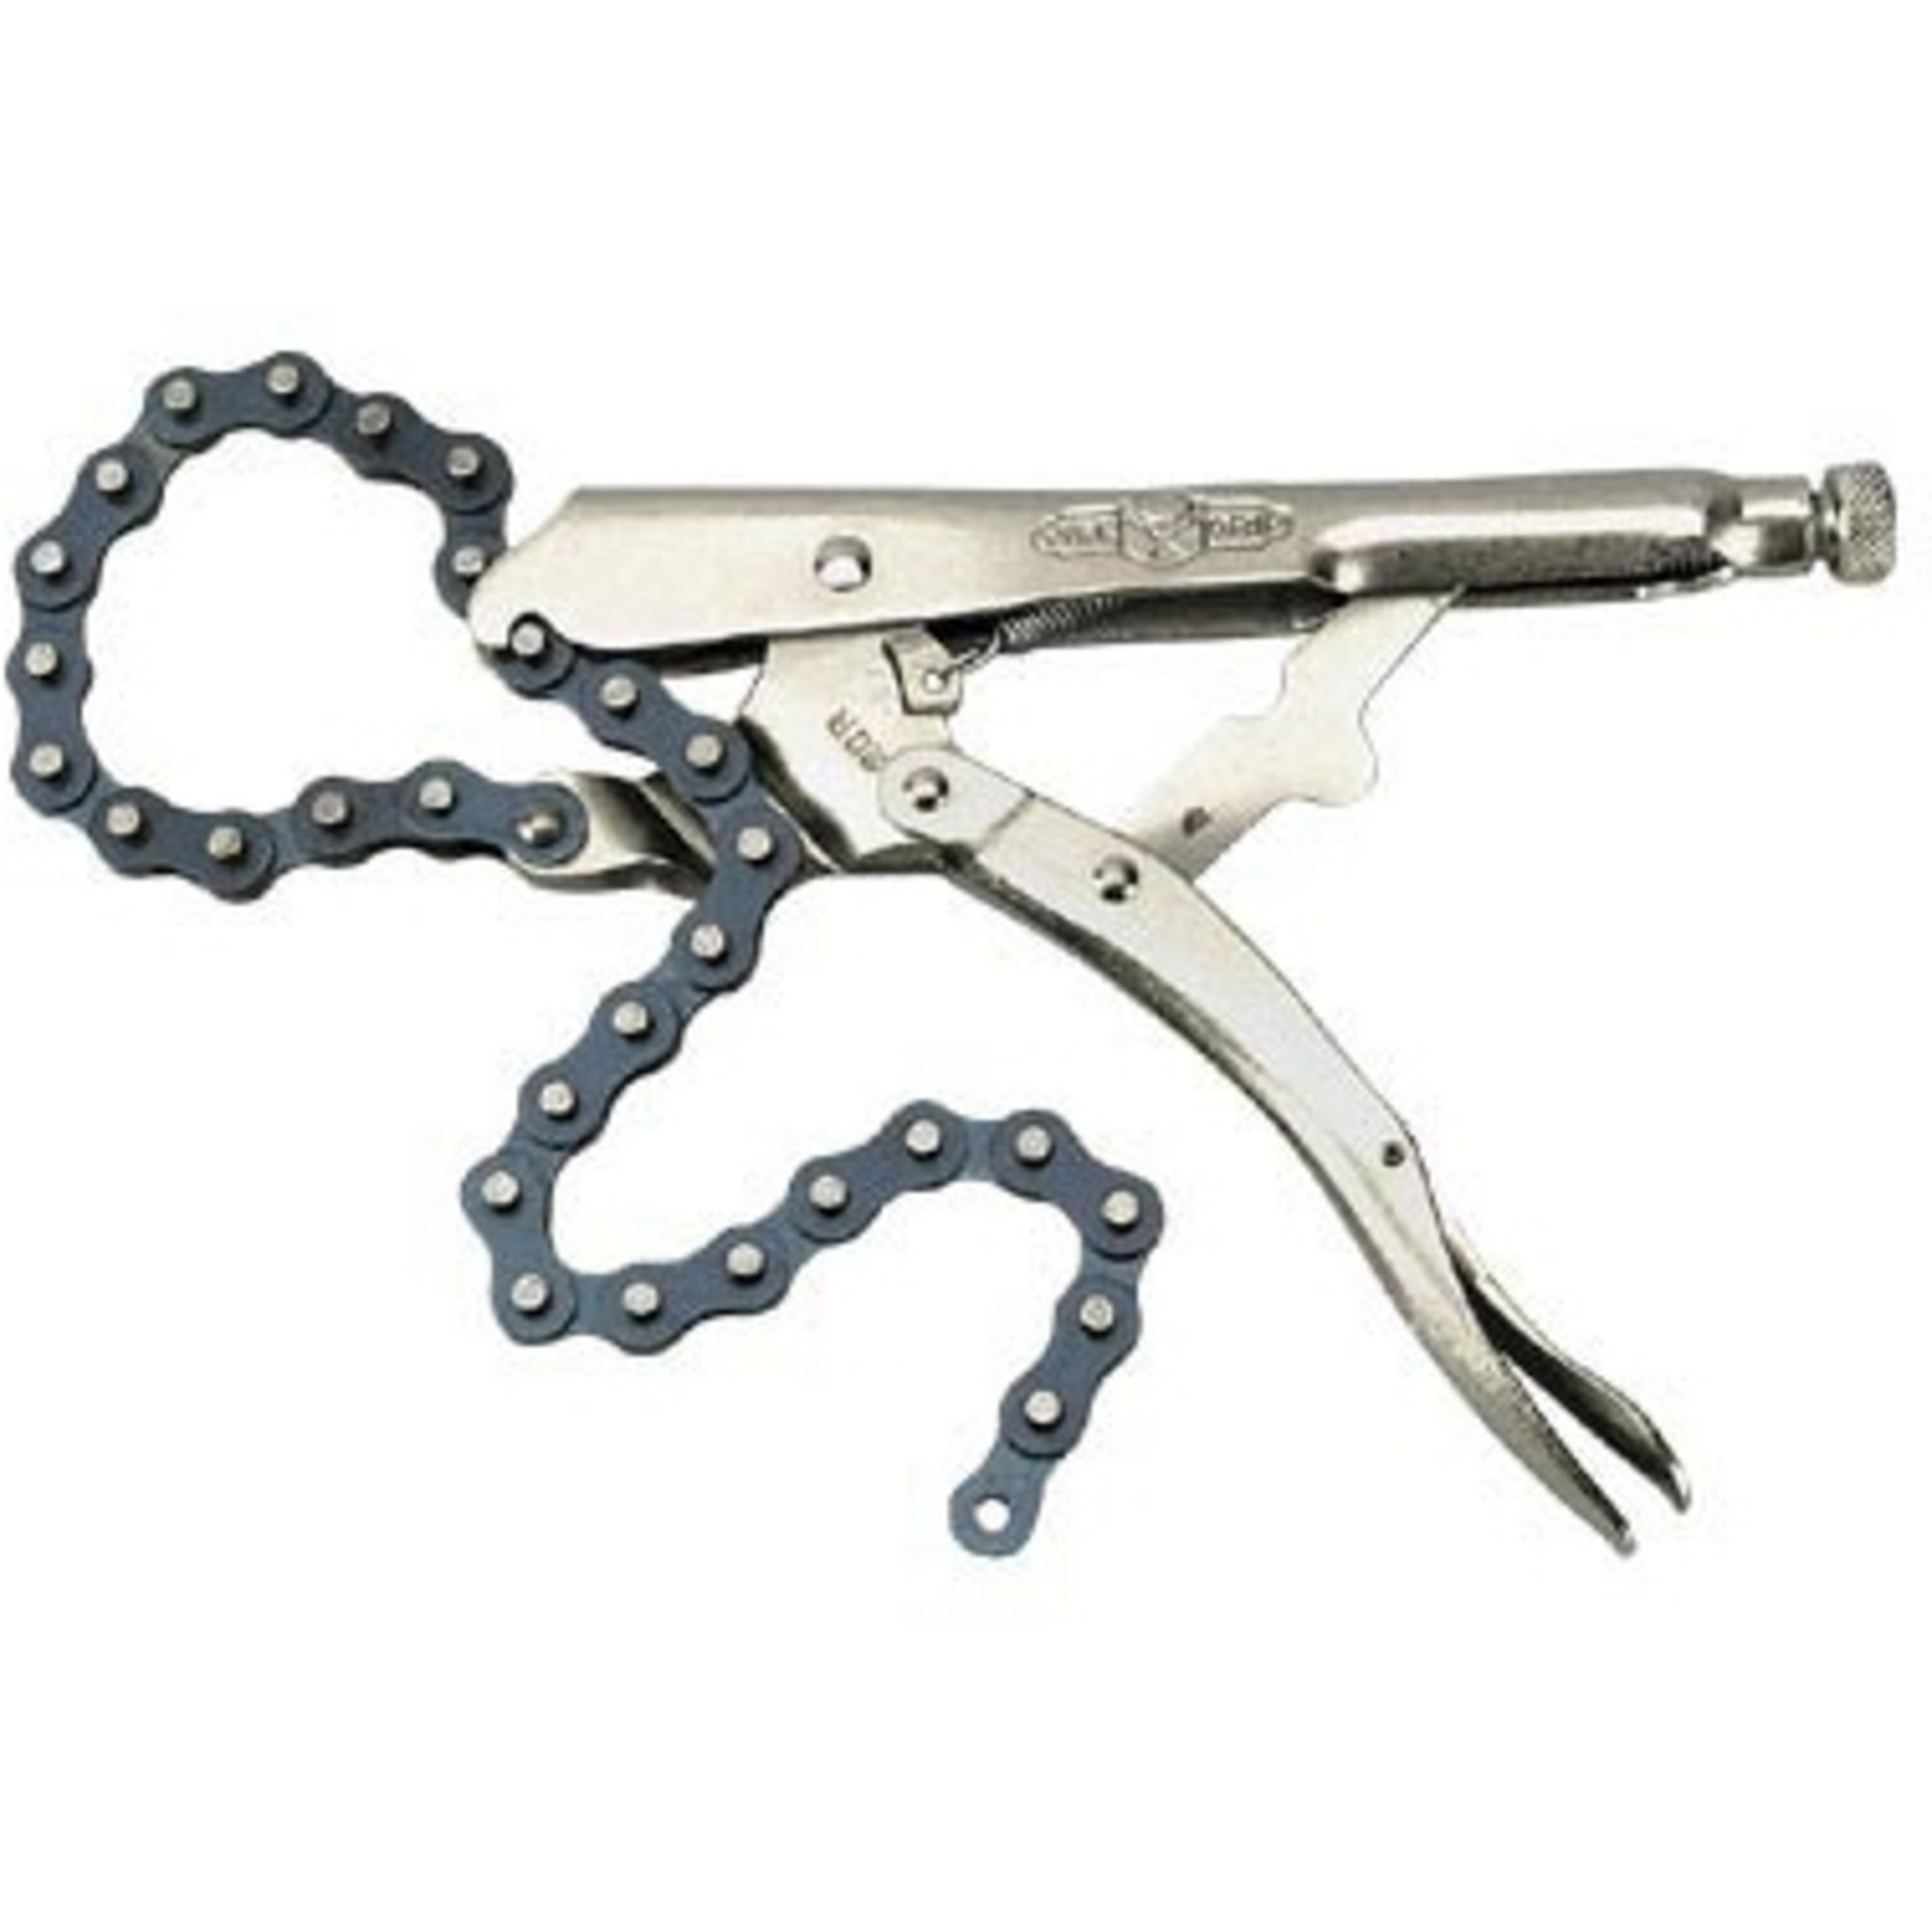 18inch Chain Locking Pliers Clamp Pliers Pipe Wrench Oil Filter Wrench